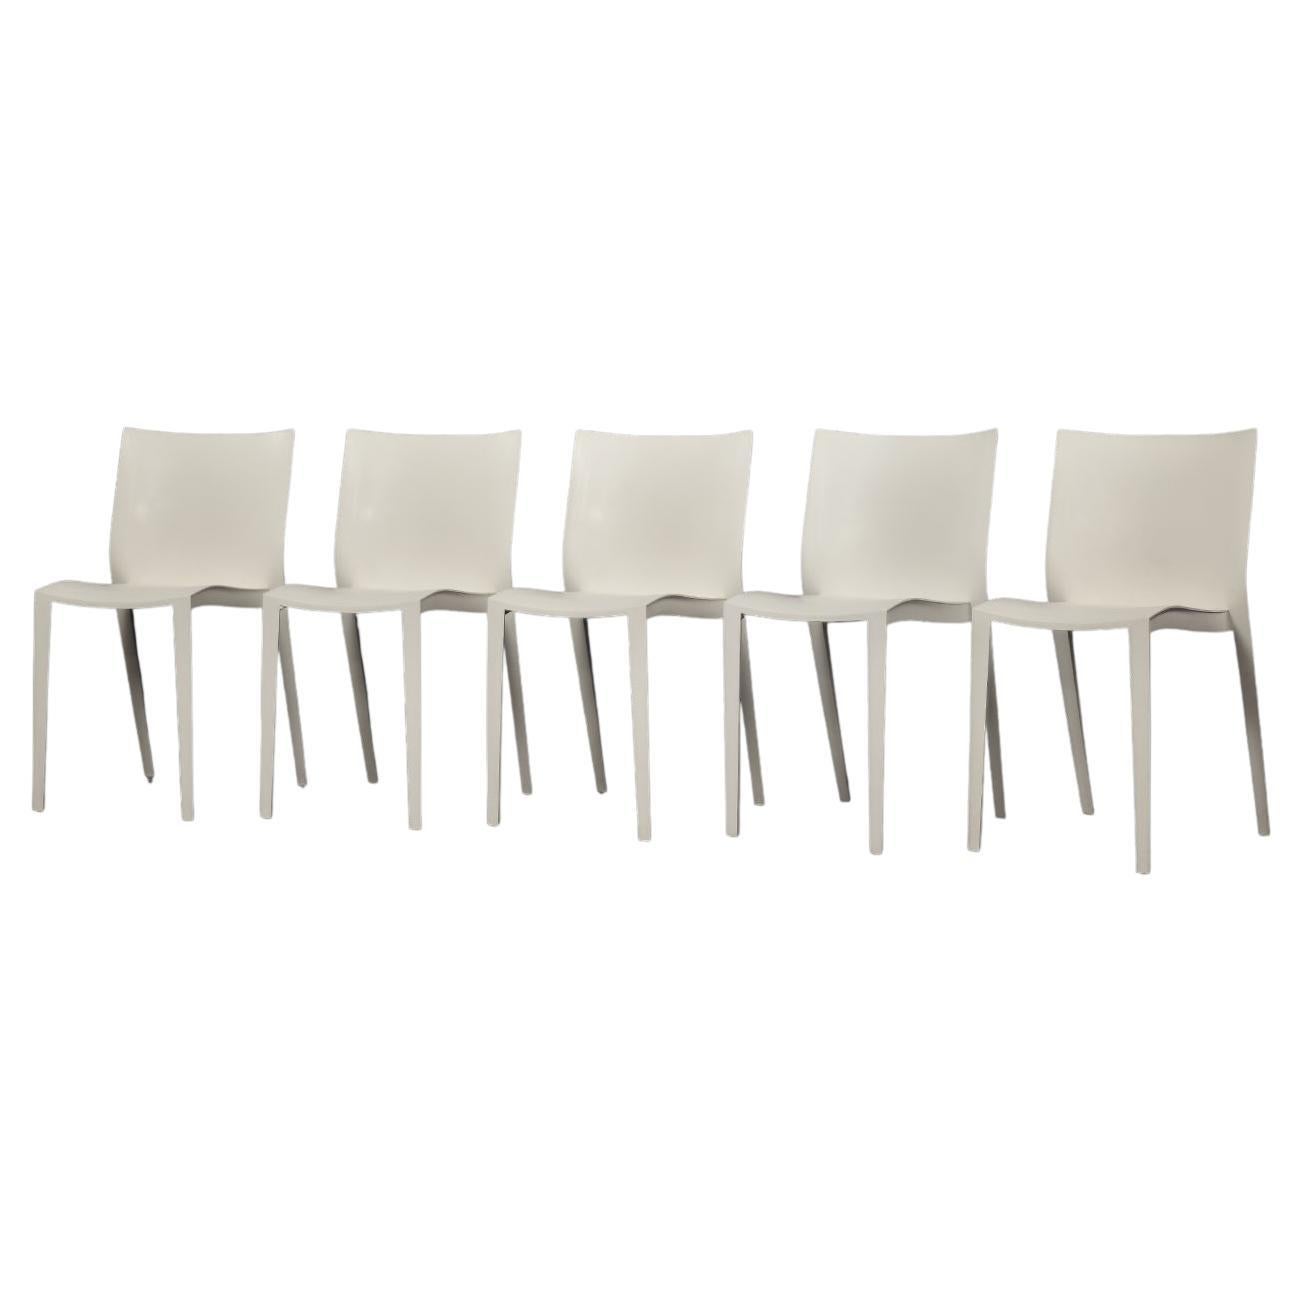 Philippe Starck Slick Slick Chairs - 3 For Sale on 1stDibs